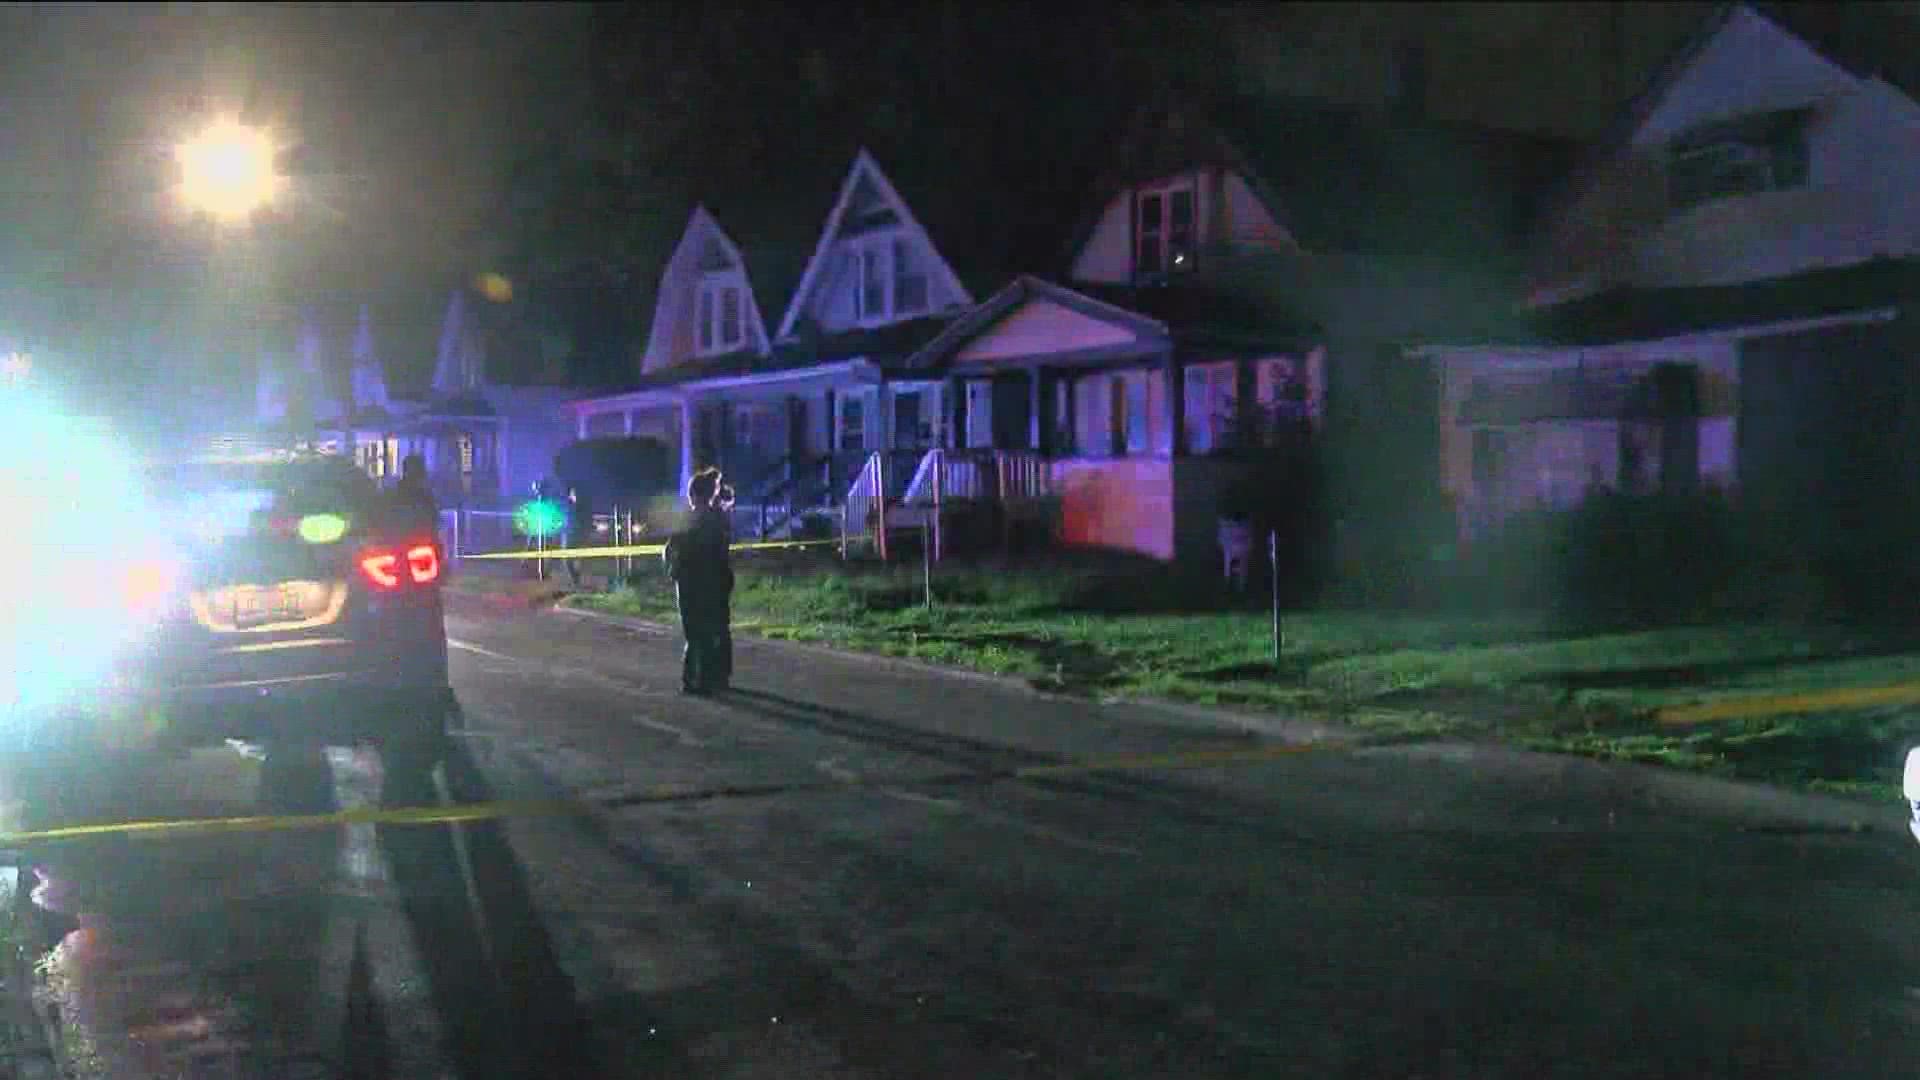 The man was shot once and his injuries appear to be non-life-threatening, Toledo police say.